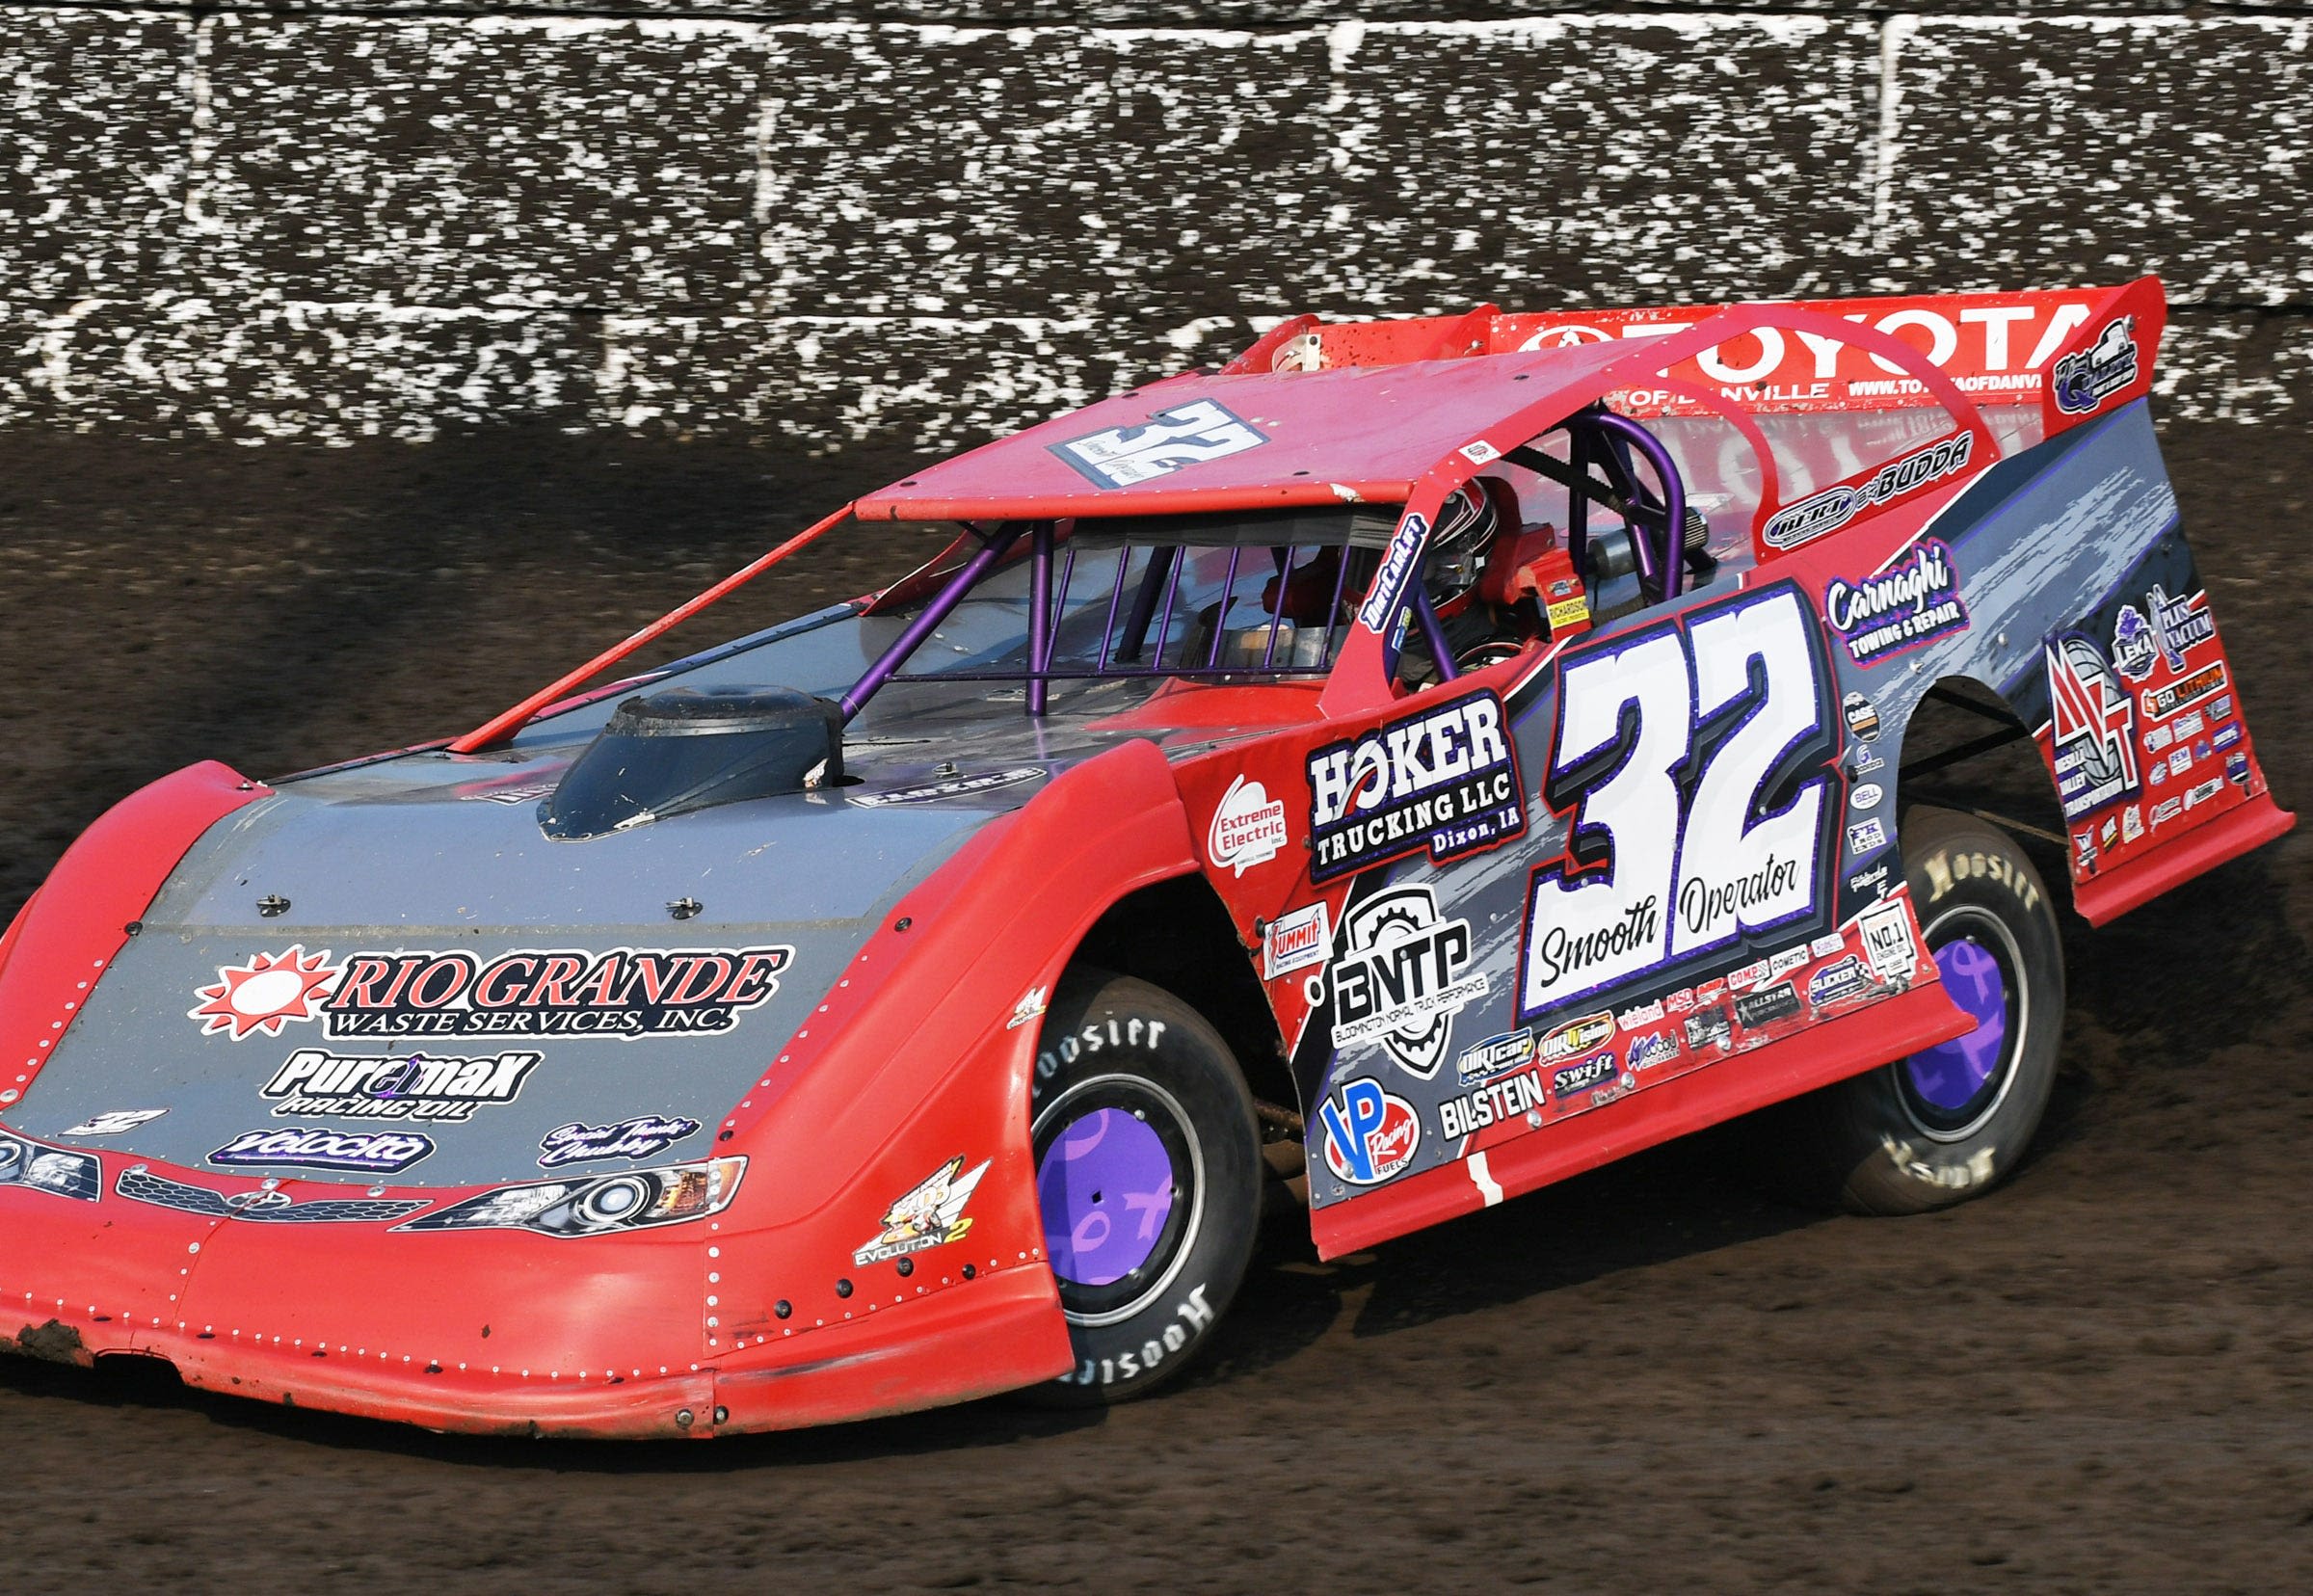 The World of Outlaws late models race at Wisconsin's Wilmot Raceway for the first time. Here's what to know.